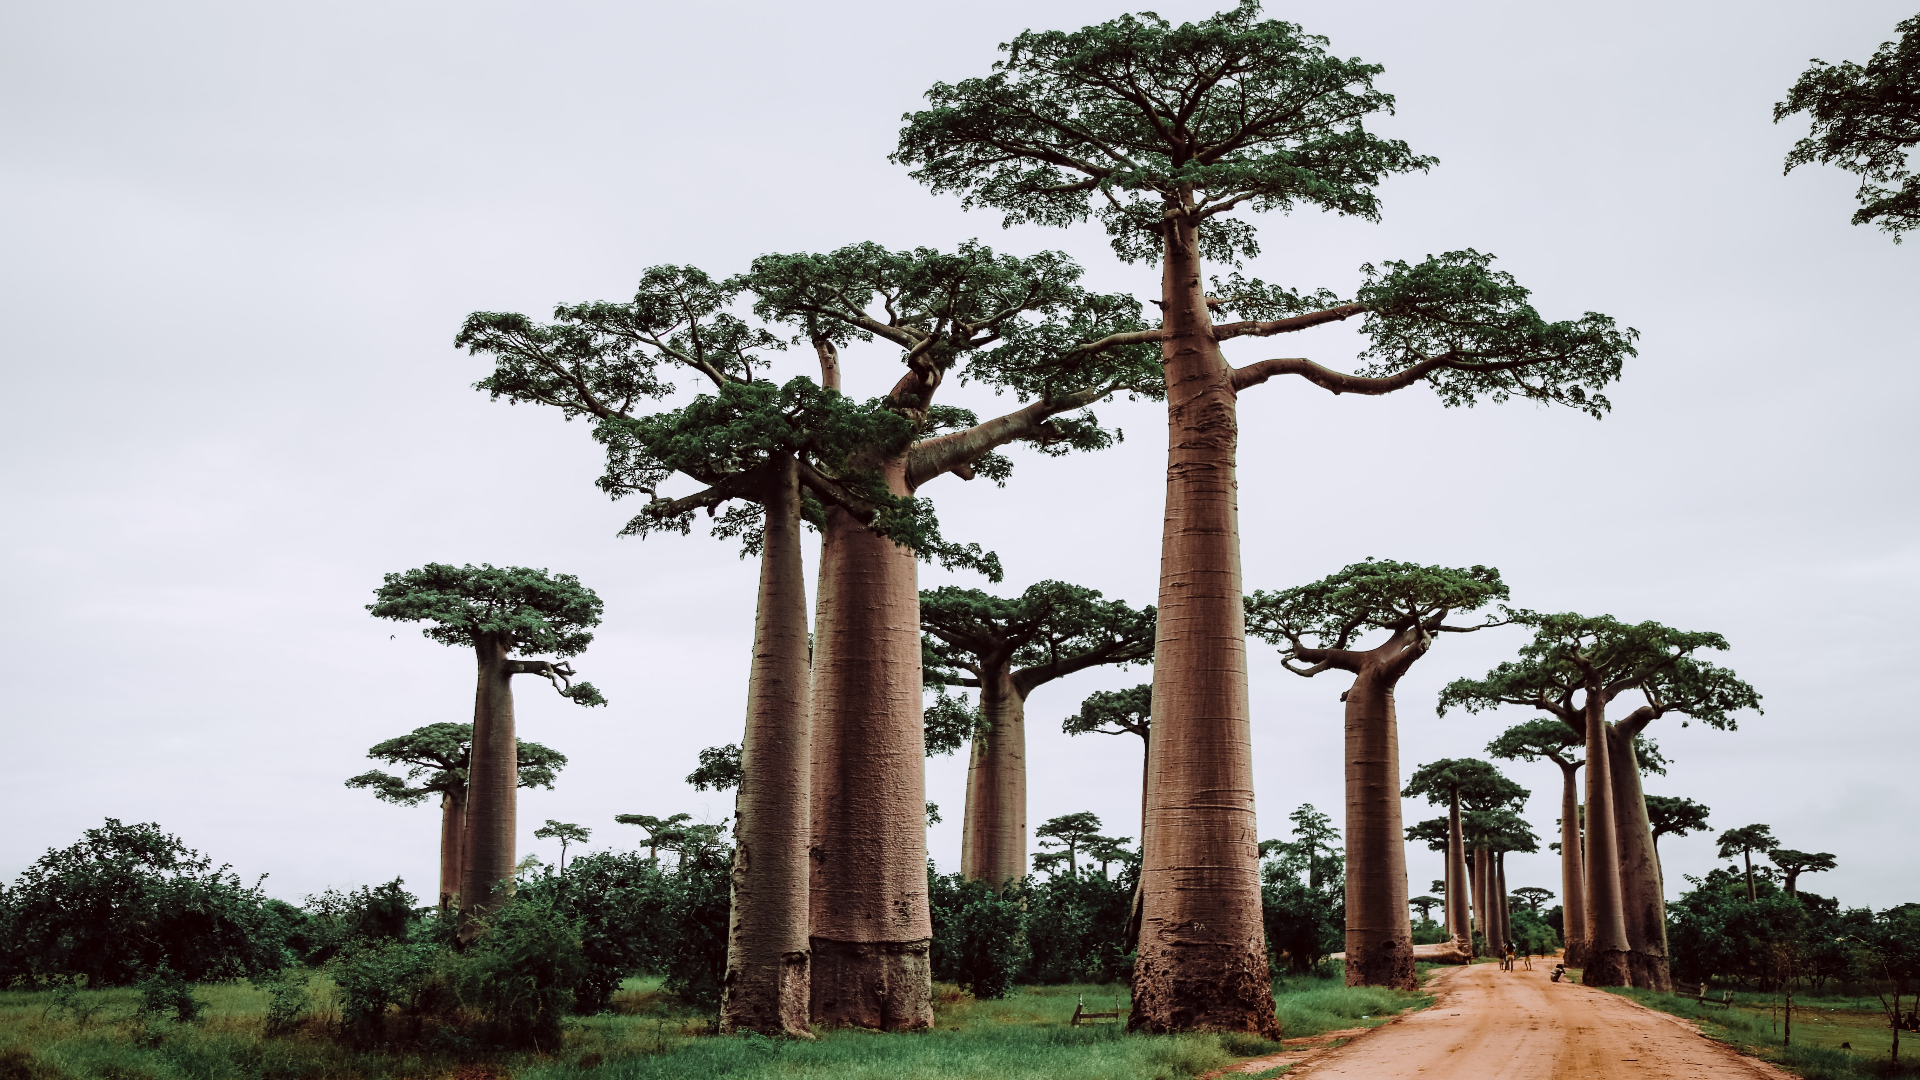 General 1920x1080 nature trees plants grass clouds road baobabs baobab trees Madagascar